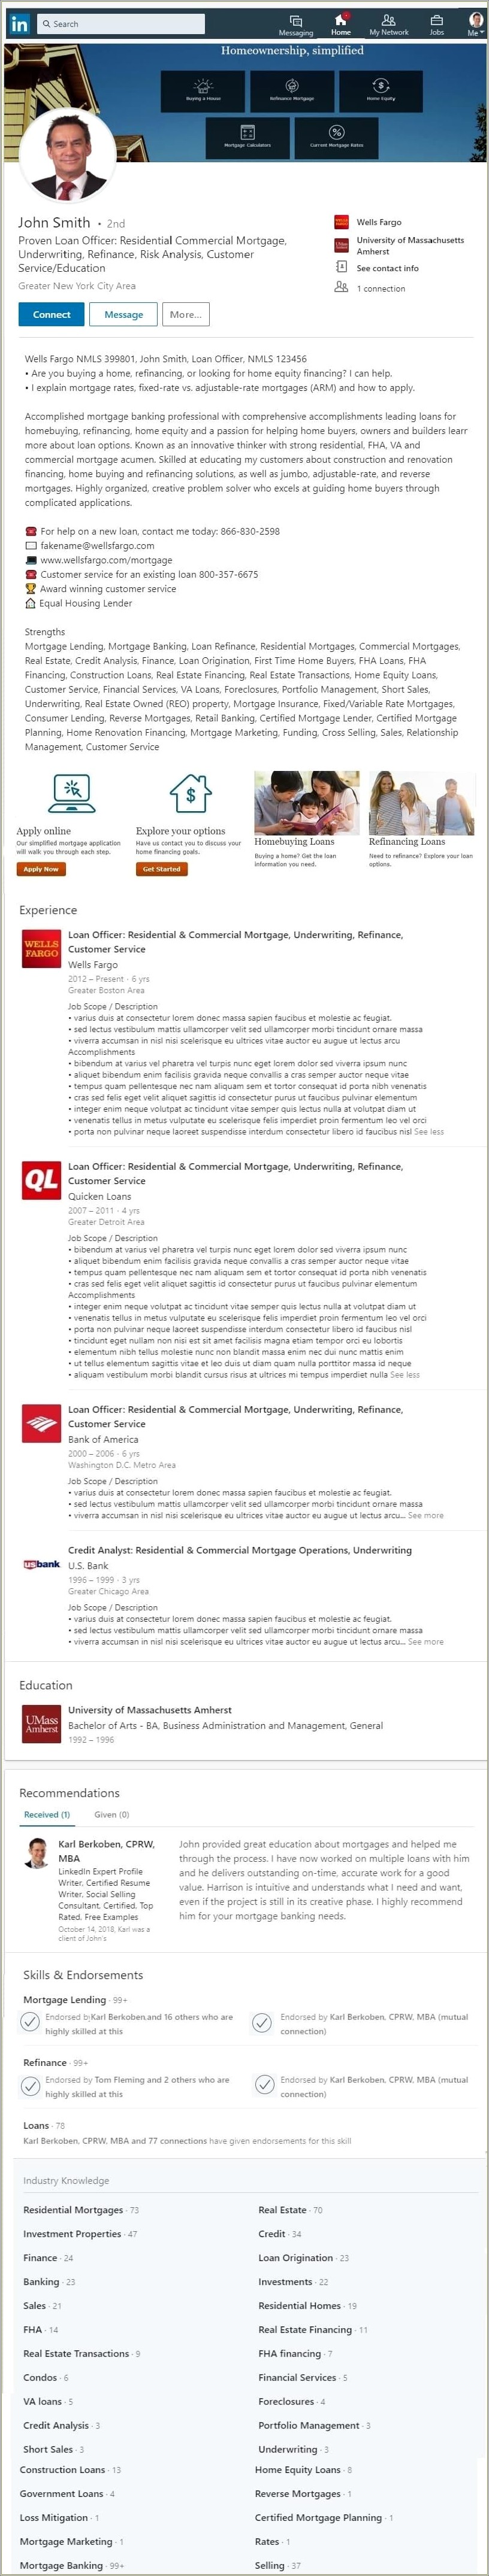 Resume Example For Mortgage Loan Officer